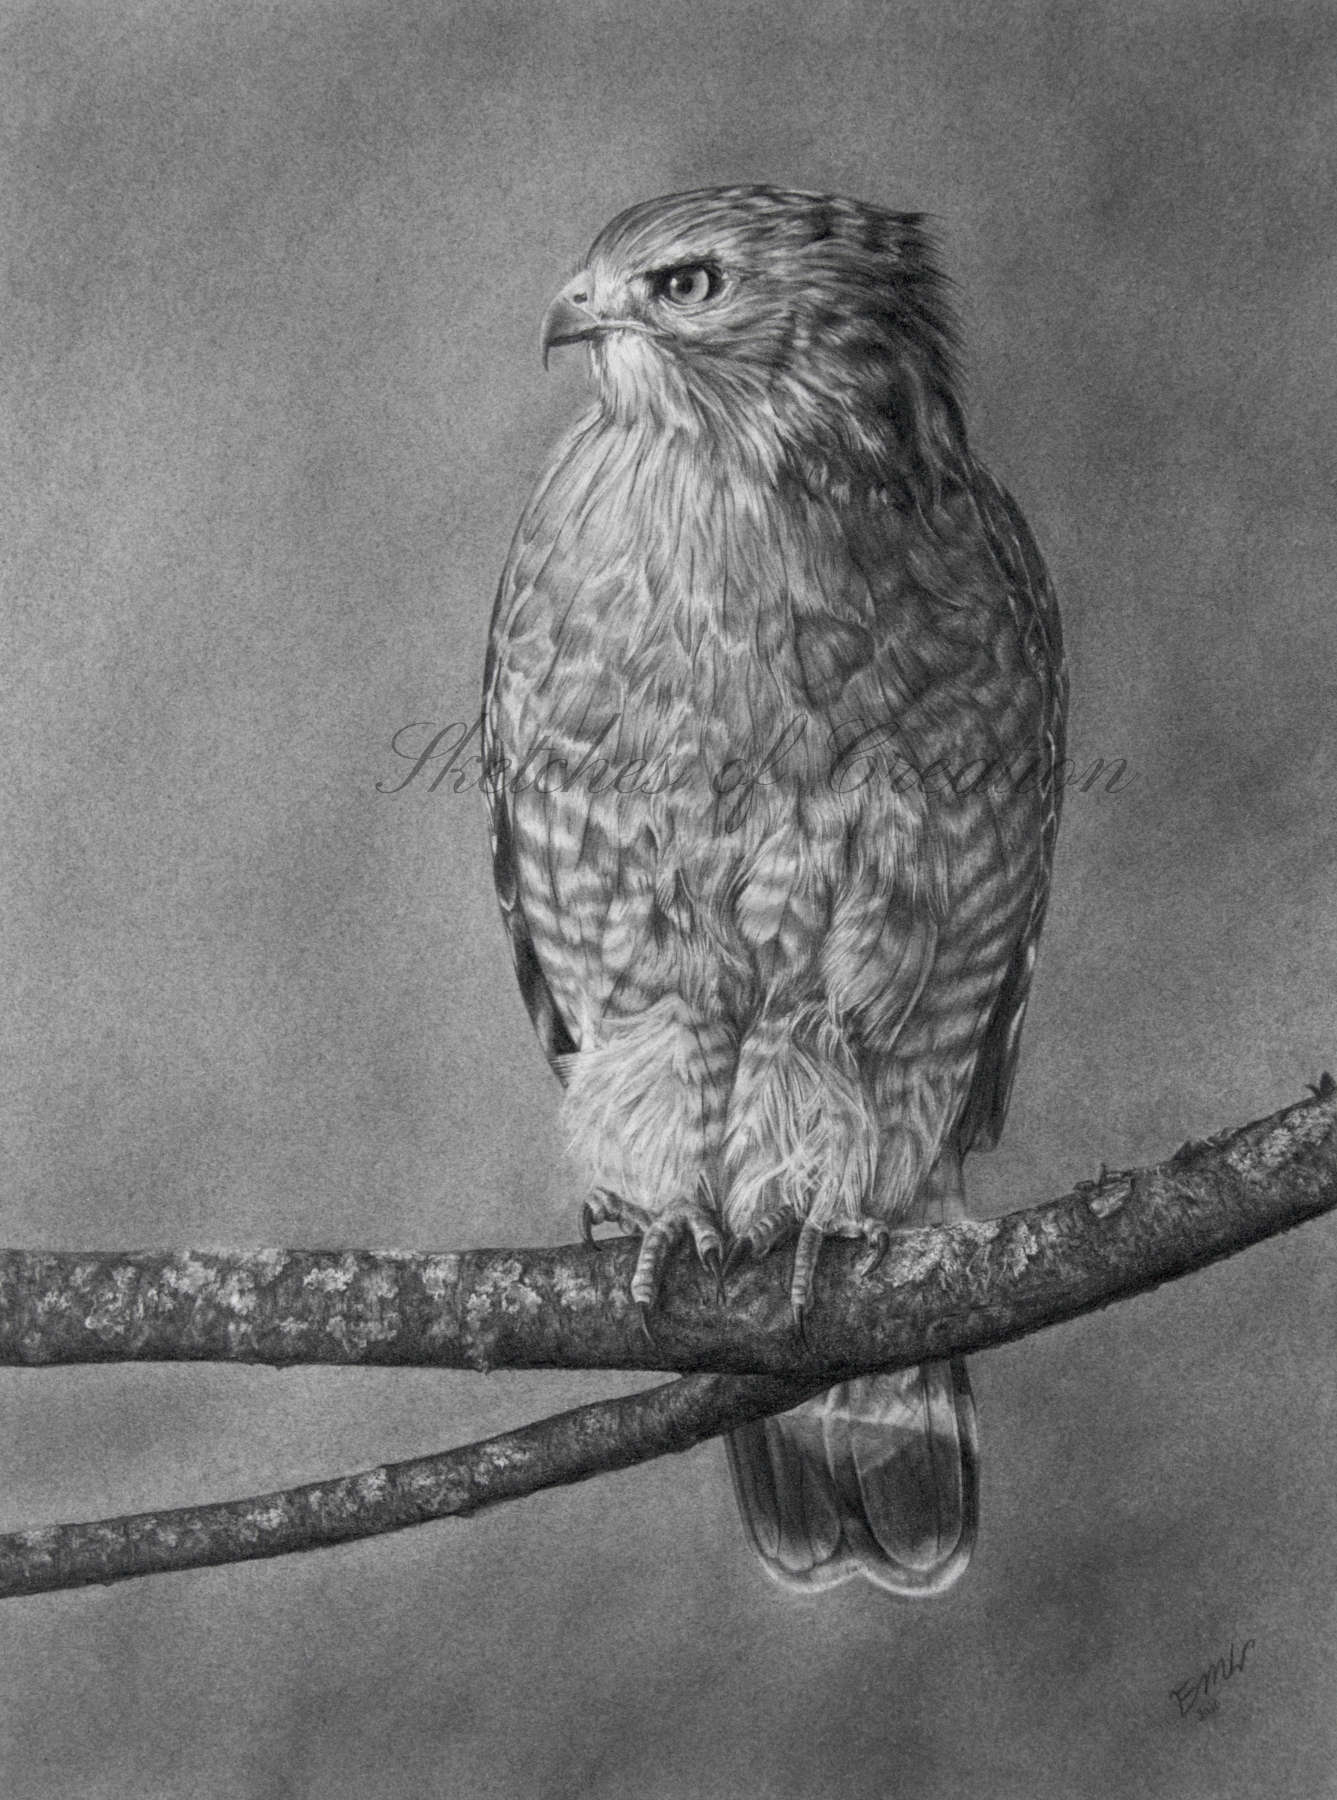 'Determination' a drawing of a Red-shouldered Hawk on a branch. 9x12 inches. Completed September 2020